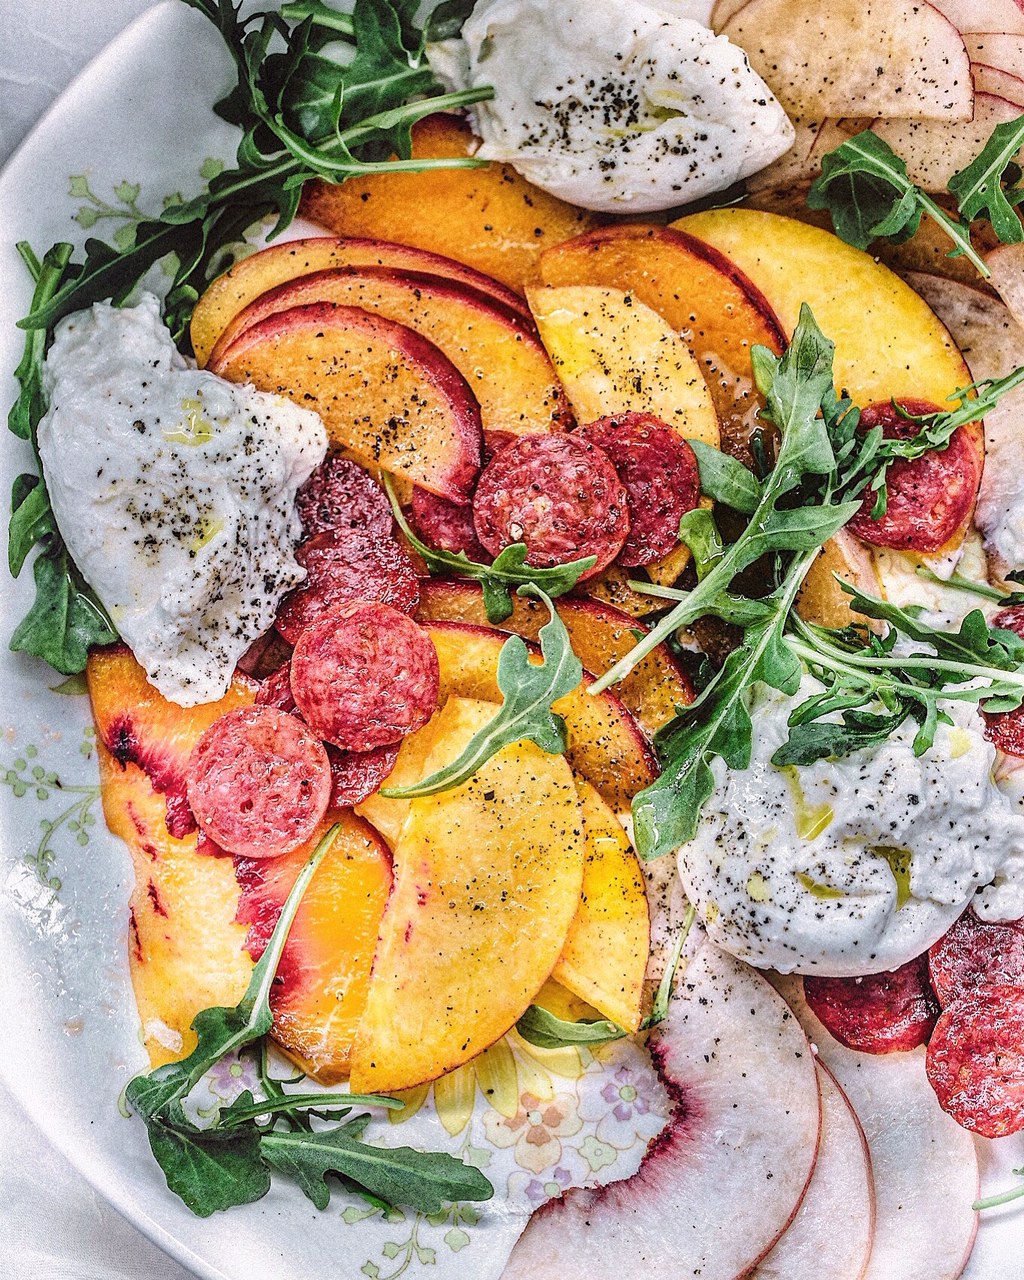 Peaches & Cream Salad with Spicy Pepperoni